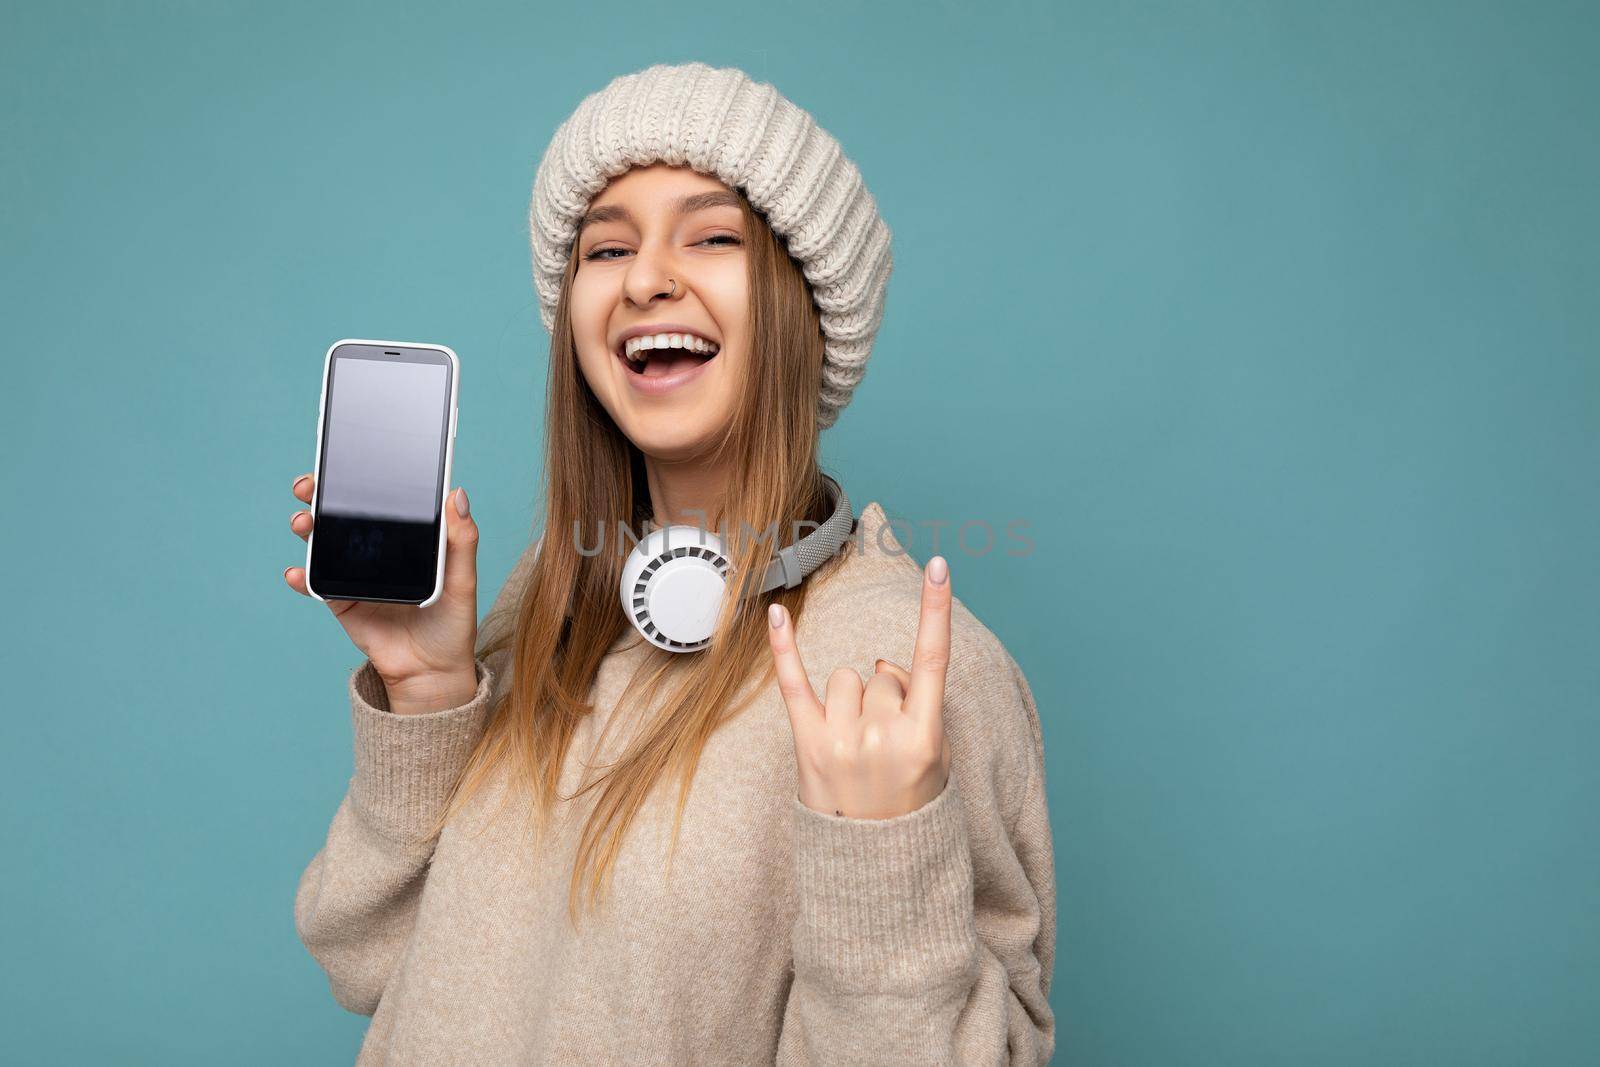 Attractive positive smiling young woman wearing stylish casual outfit isolated on colourful background wall holding and showing mobile phone with empty screen for cutout wearing white bluetooth headphones and having fun looking at camera and showing rock and roll gesture sign by TRMK